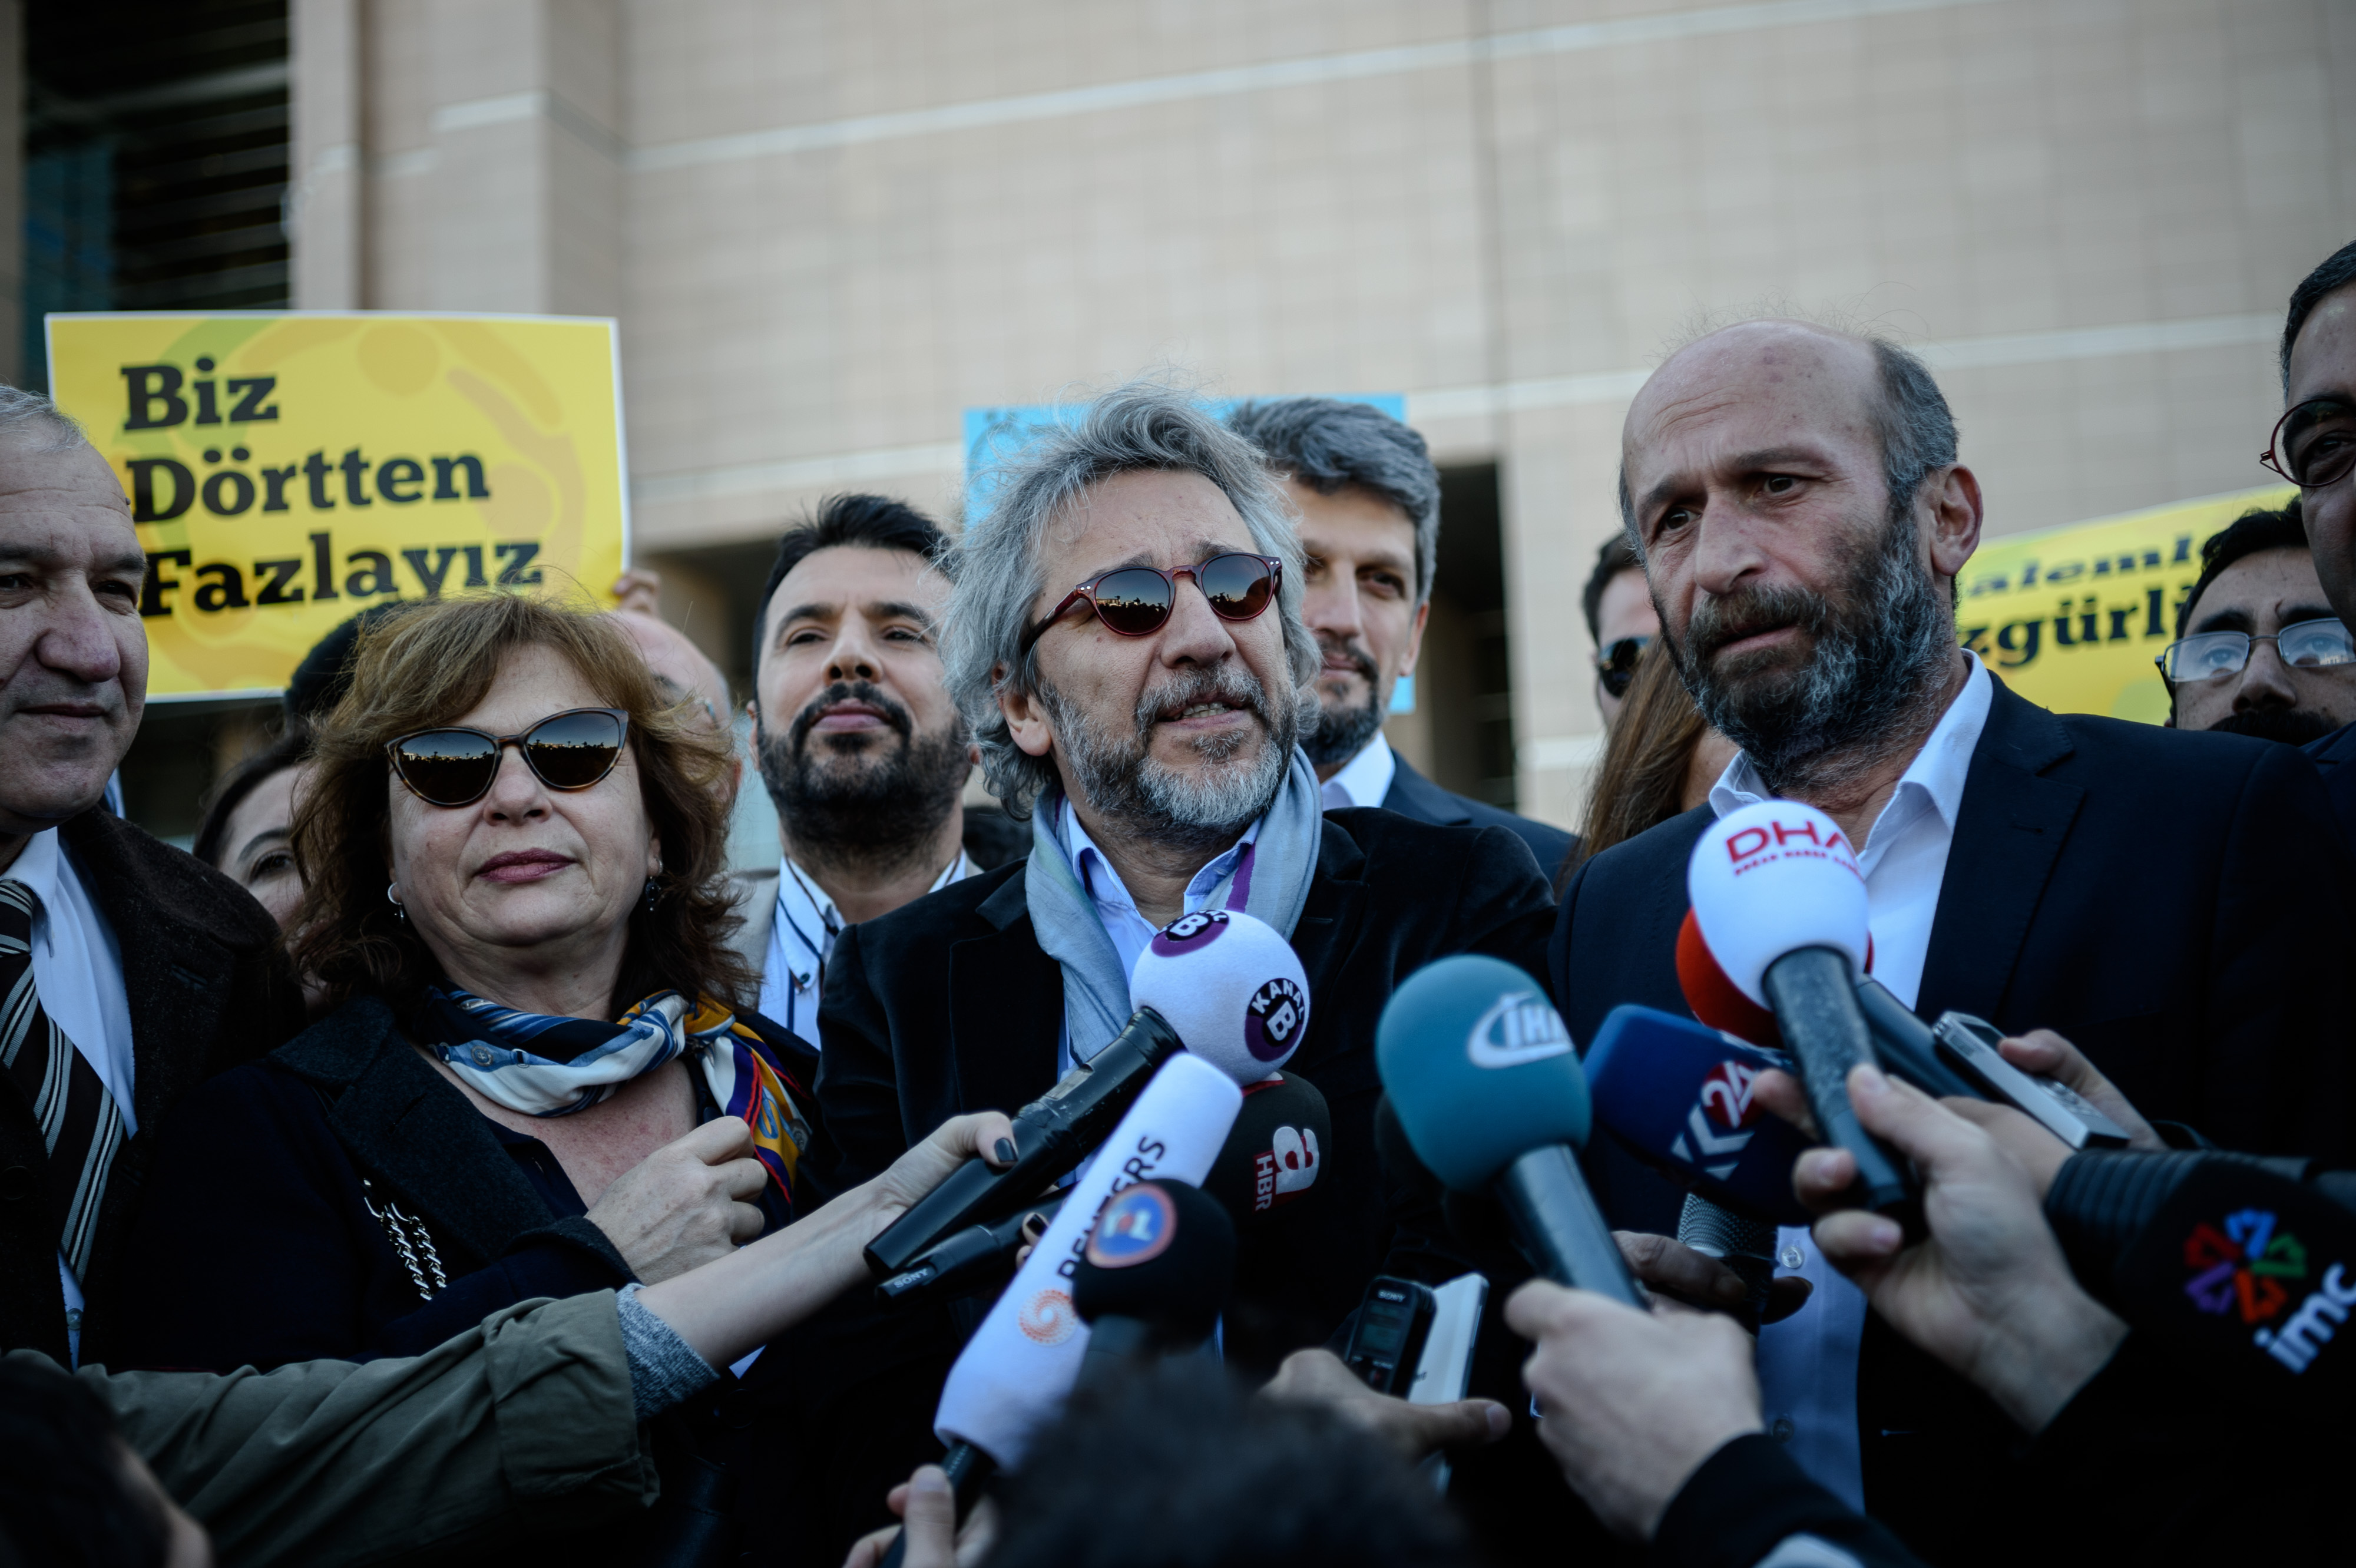 Editor-in-chief of Turkish newspaper Cumhuriyet daily Can Dundar (C) and the newspaper bureau chief in Ankara Erdem Gul (R) arrive to the Istanbul courthouse for their trial on April 22, 2016 in istanbul.   Cumhuriyet daily's editor-in-chief Can Dundar and Ankara bureau chief Erdem Gul face possible life terms on spying charges over a news report accusing President Recep Tayyip Erdogan's government of seeking to illicitly deliver arms bound for neighbouring Syria. / AFP / OZAN KOSE        (Photo credit should read OZAN KOSE/AFP/Getty Images)